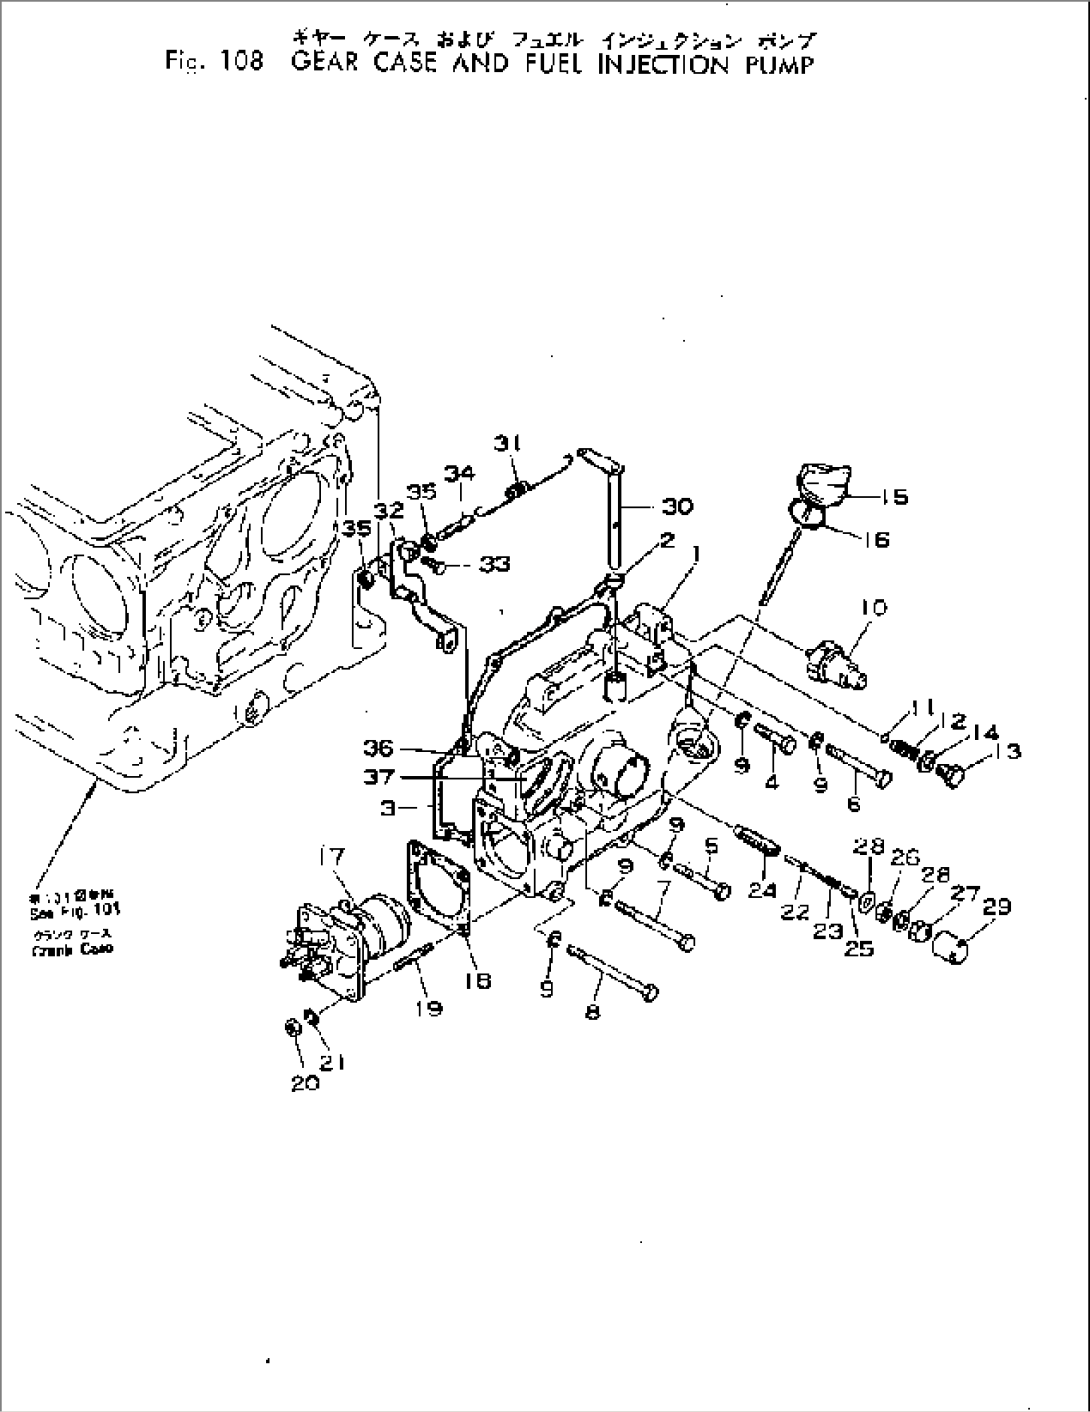 GEAR CASE AND FUEL INJECTION PUMP